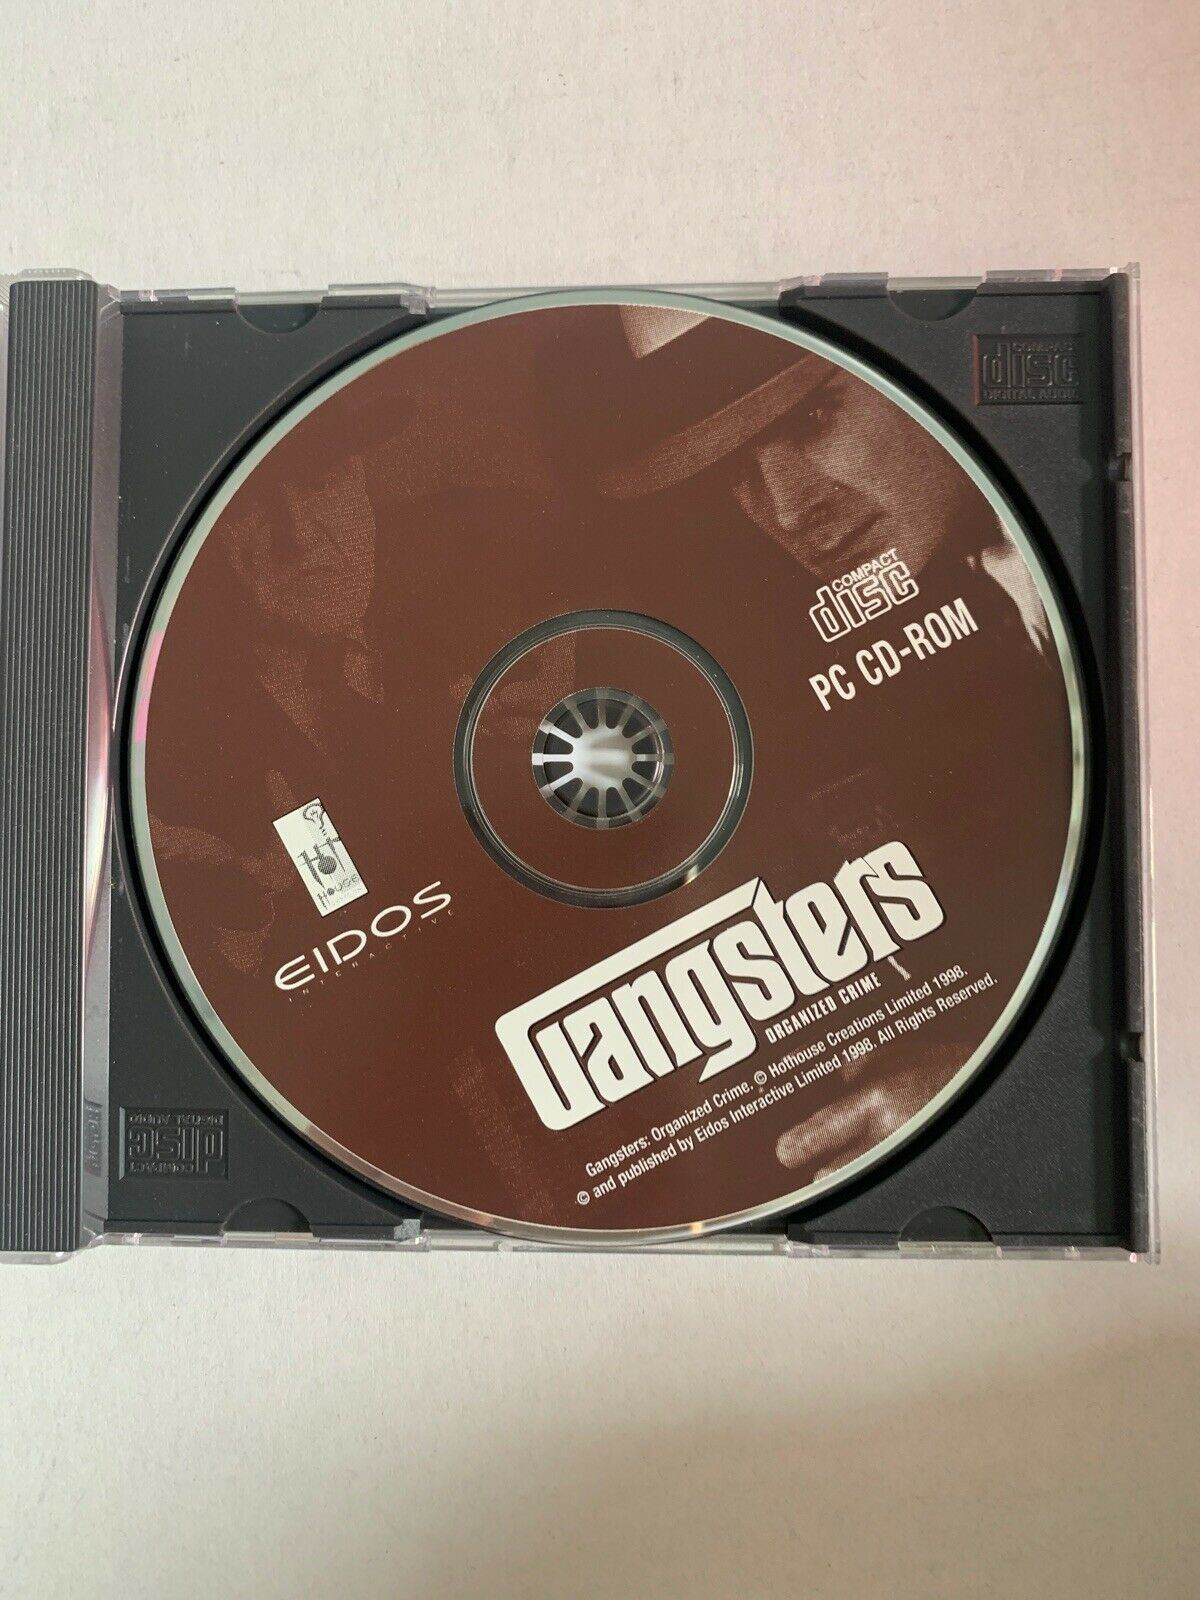 Gangsters Organized Crime PC CDROM (1998) Eidos Strategy Game